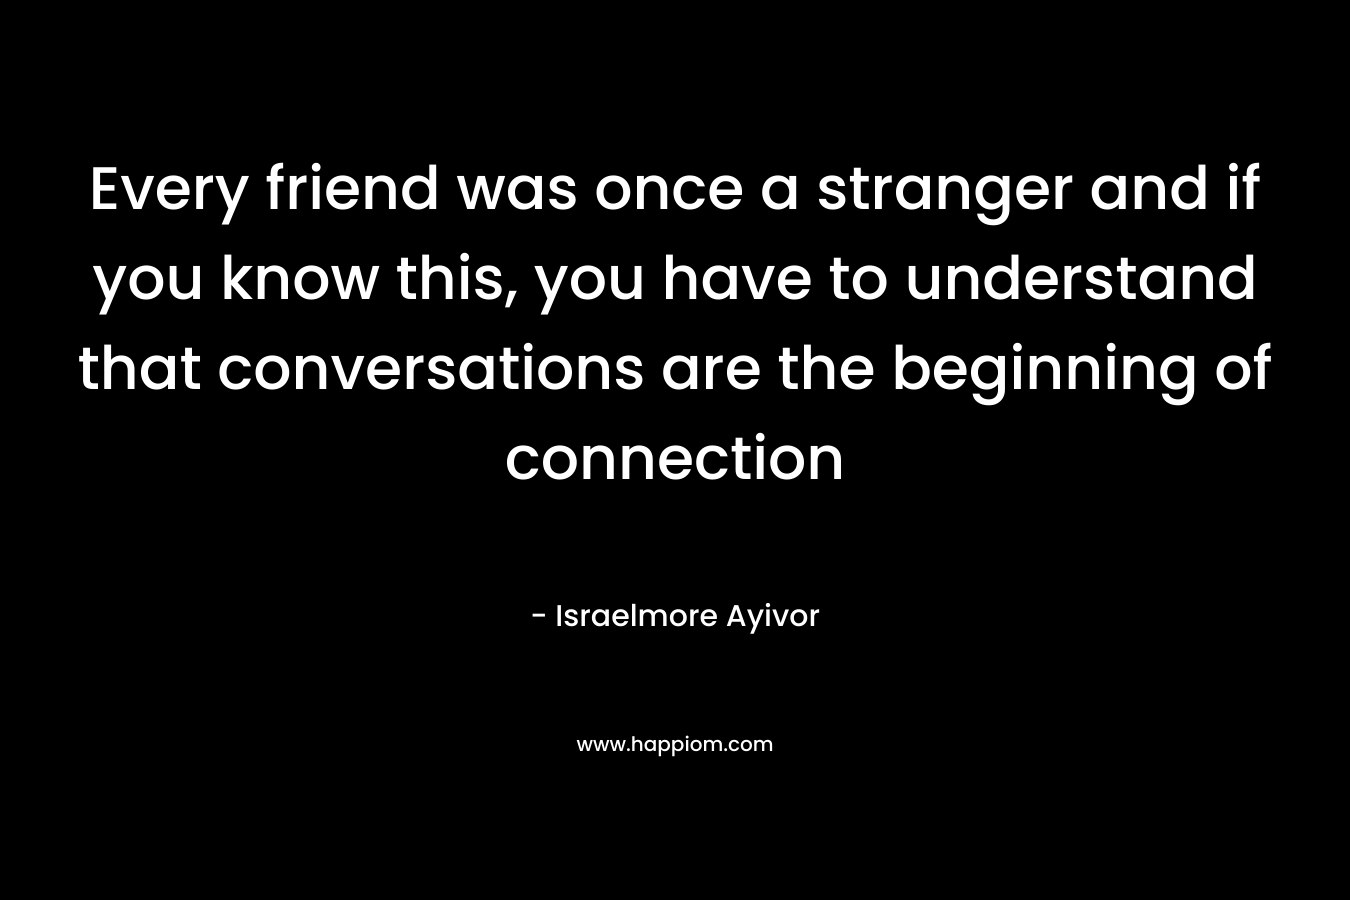 Every friend was once a stranger and if you know this, you have to understand that conversations are the beginning of connection